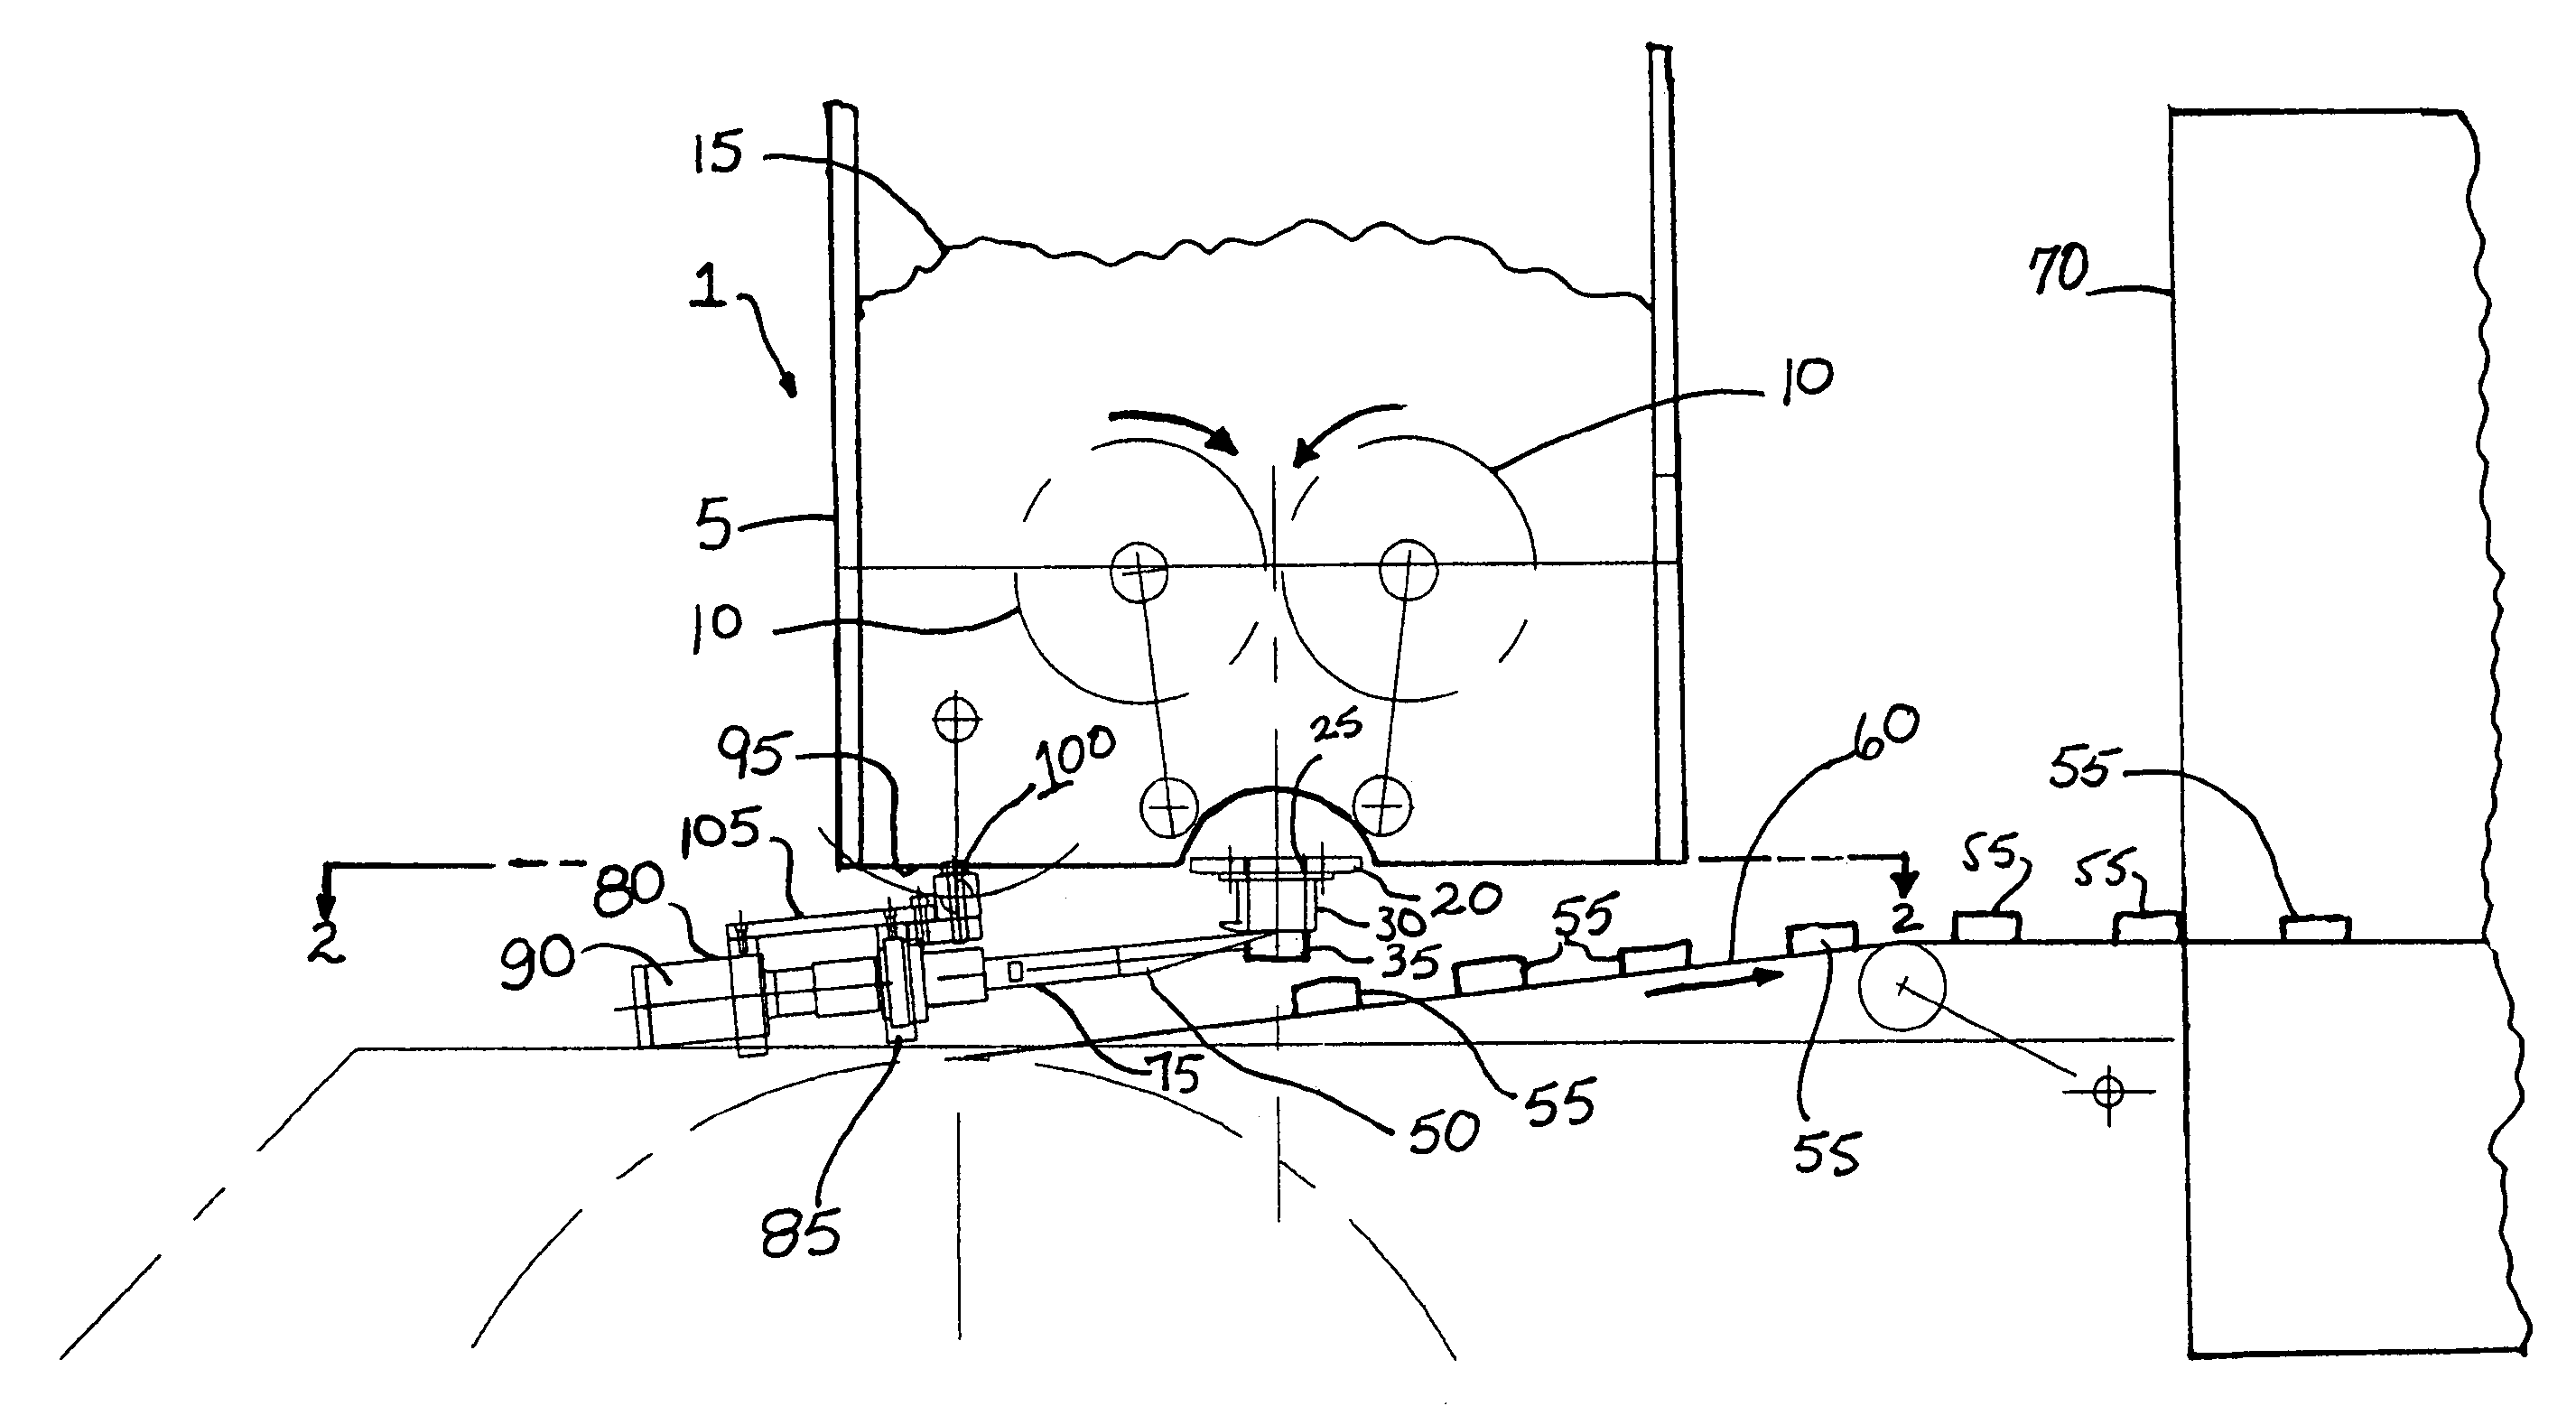 Production of cookies having large particulates using ultrasonic wirecutting